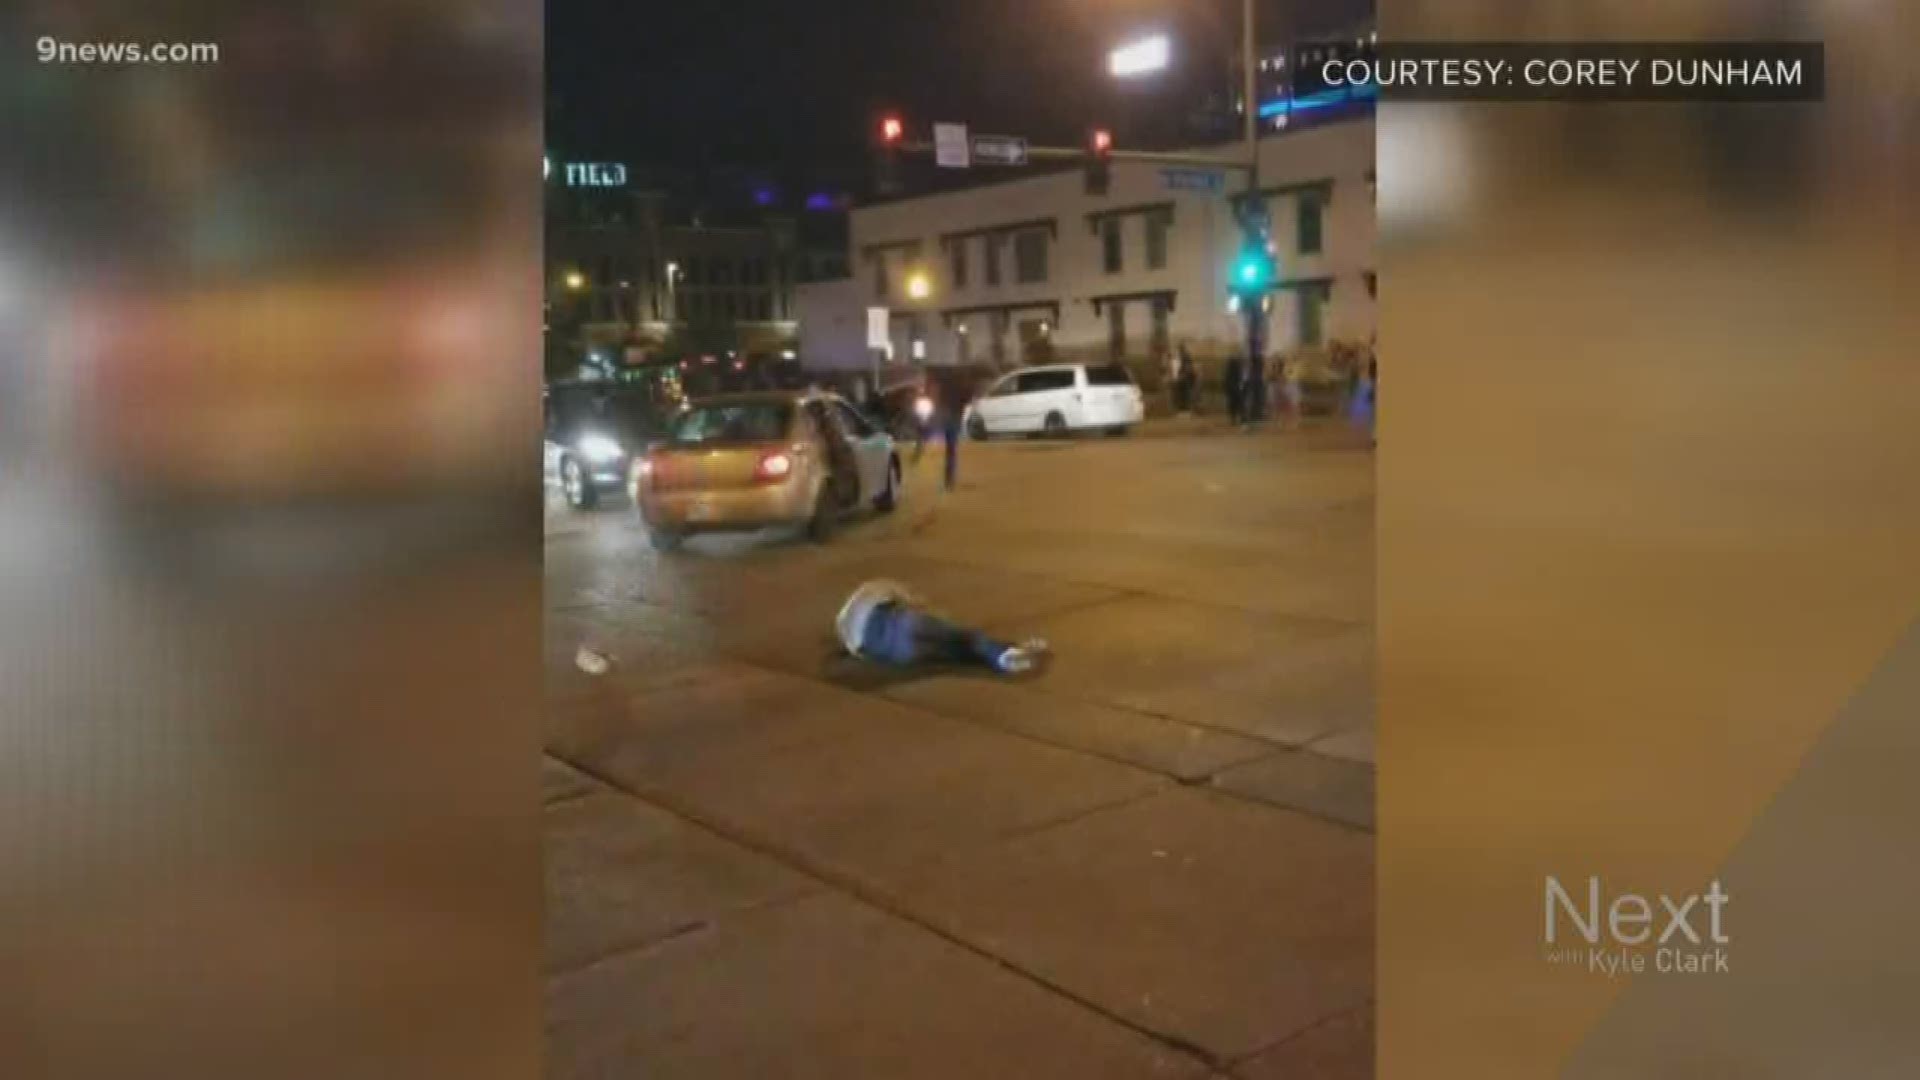 A wild scene unfolded in downtown Denver that the public wouldn't have seen or heard about if not for witnesses' video.